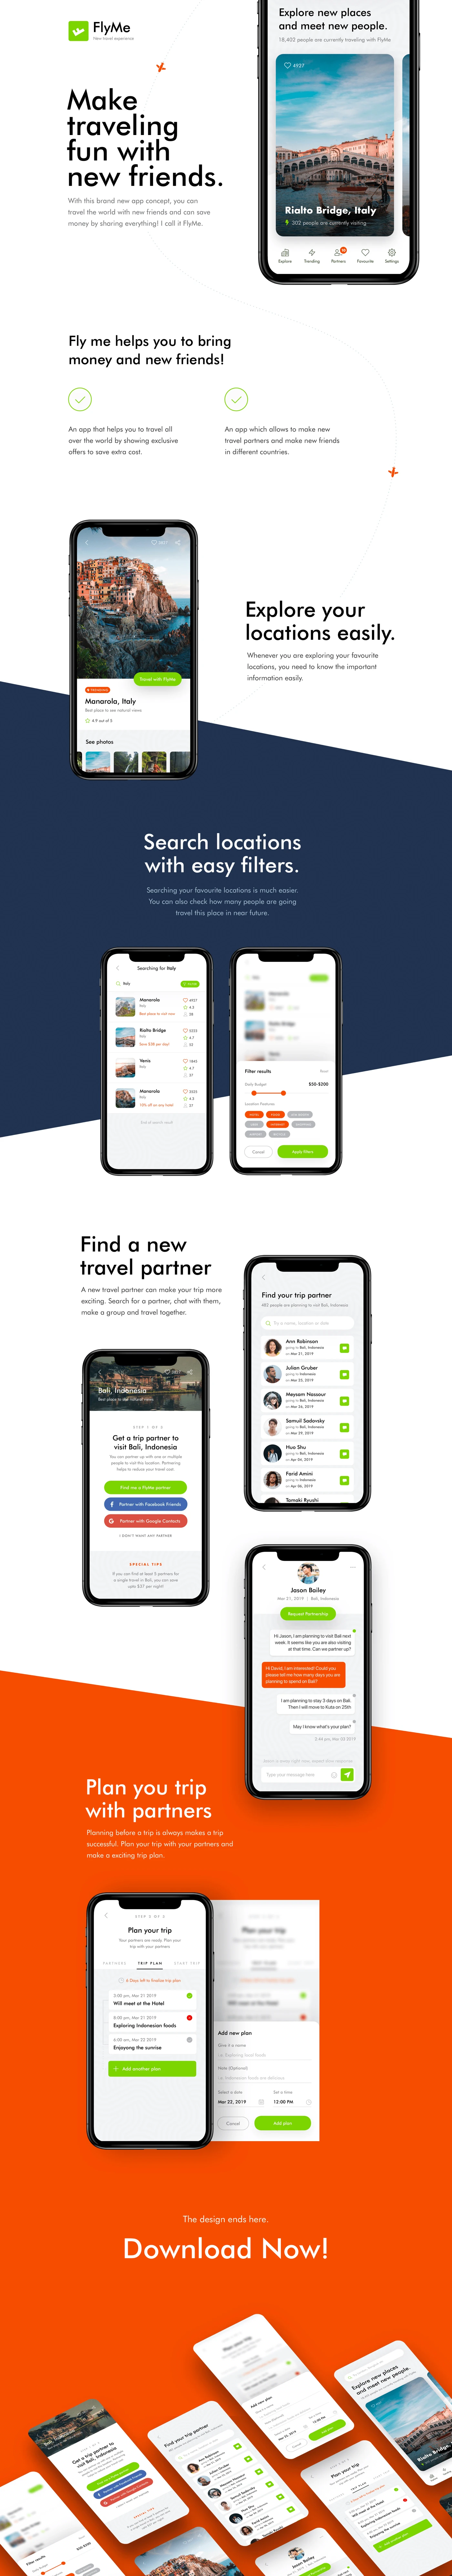 FlyMe - Free Travel App UI Kit - Minimal and clean app design by Farhan. Make traveling fun with new friends.